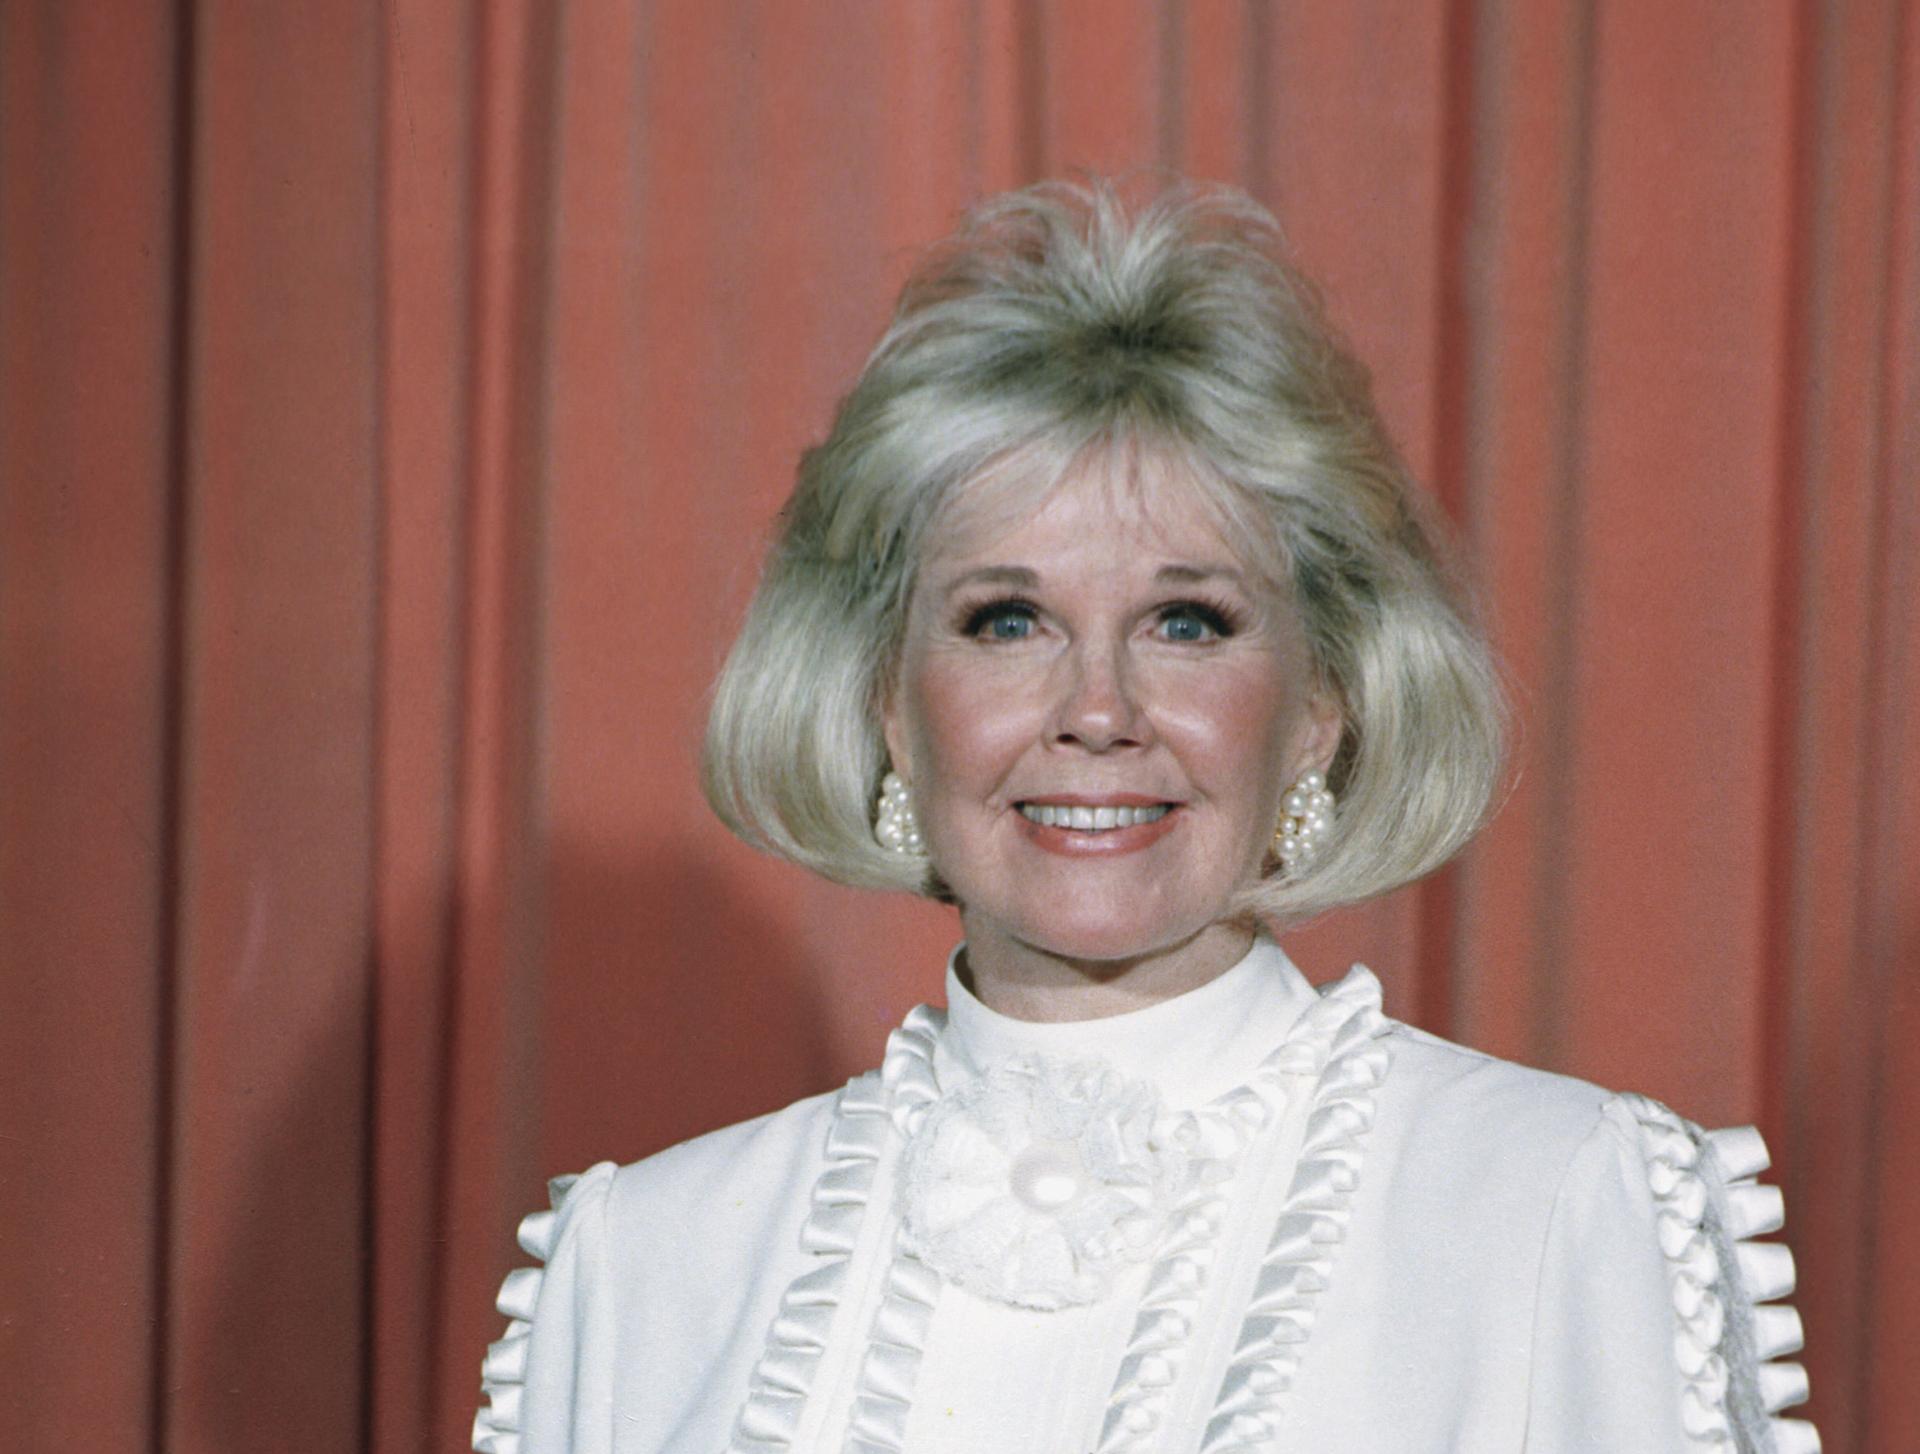 In this Jan. 28, 1989 file photo, actress and animal rights activist Doris Day poses for photos after receiving the Cecil B. DeMille Award she was presented with at the annual Golden Globe Awards ceremony in Los Angeles. (AP Photo, File)